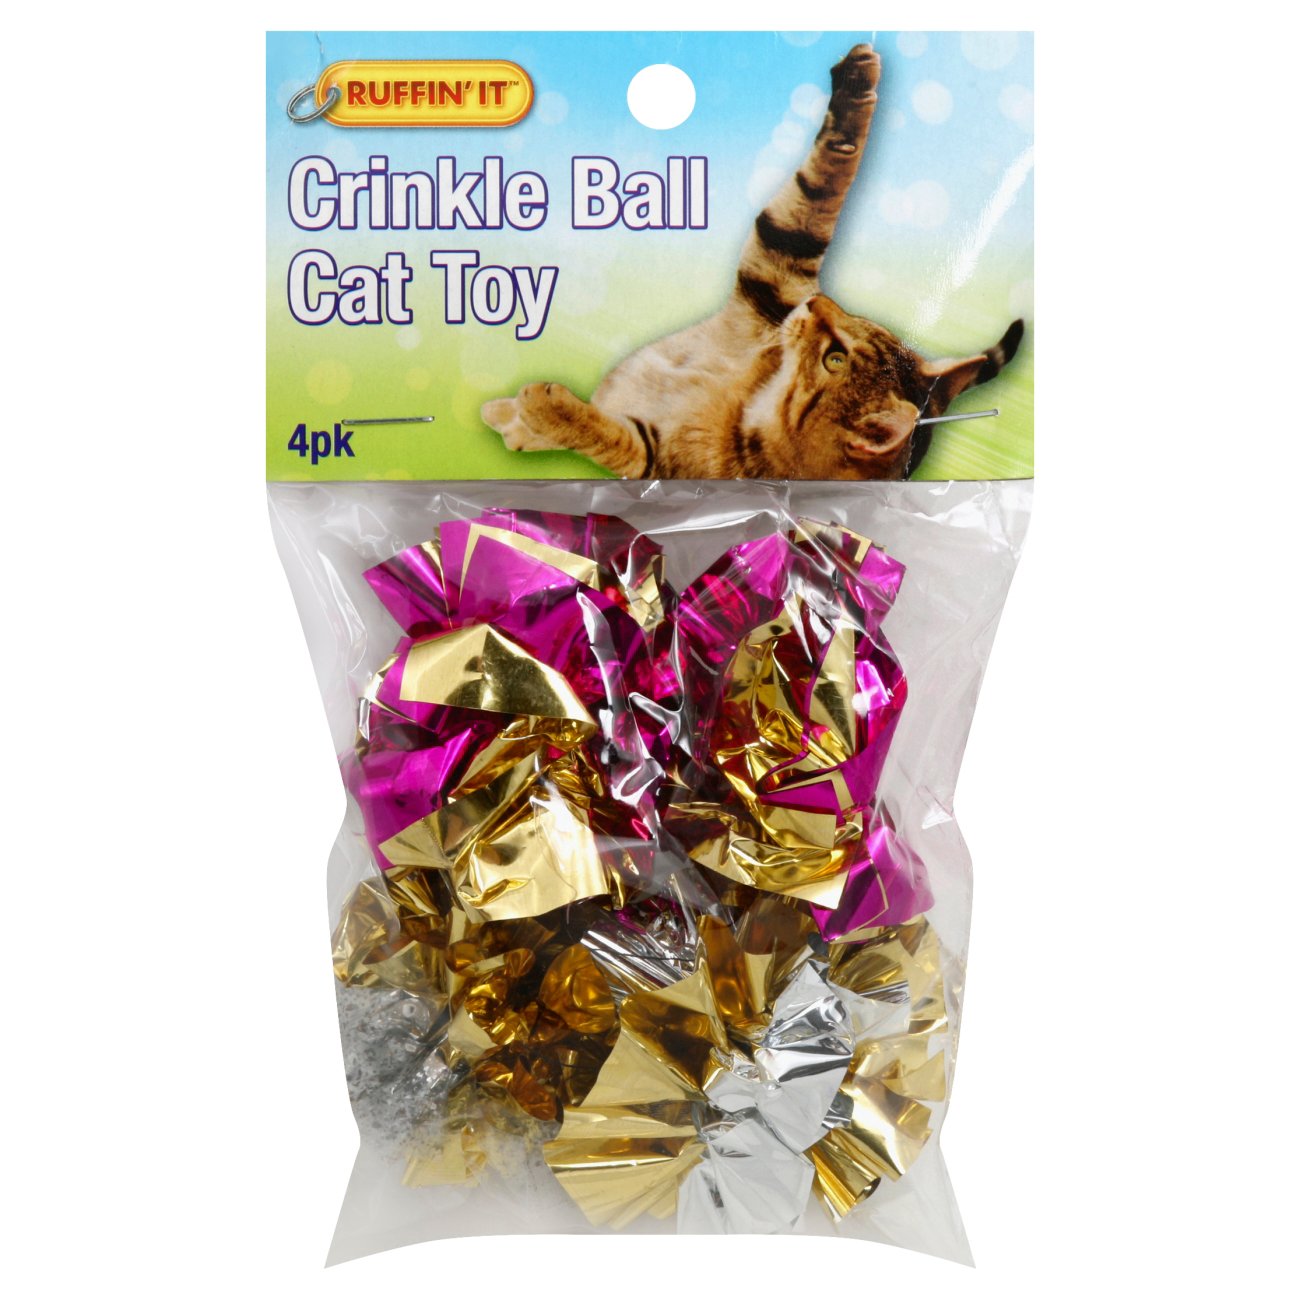 crinkle ball cat toy